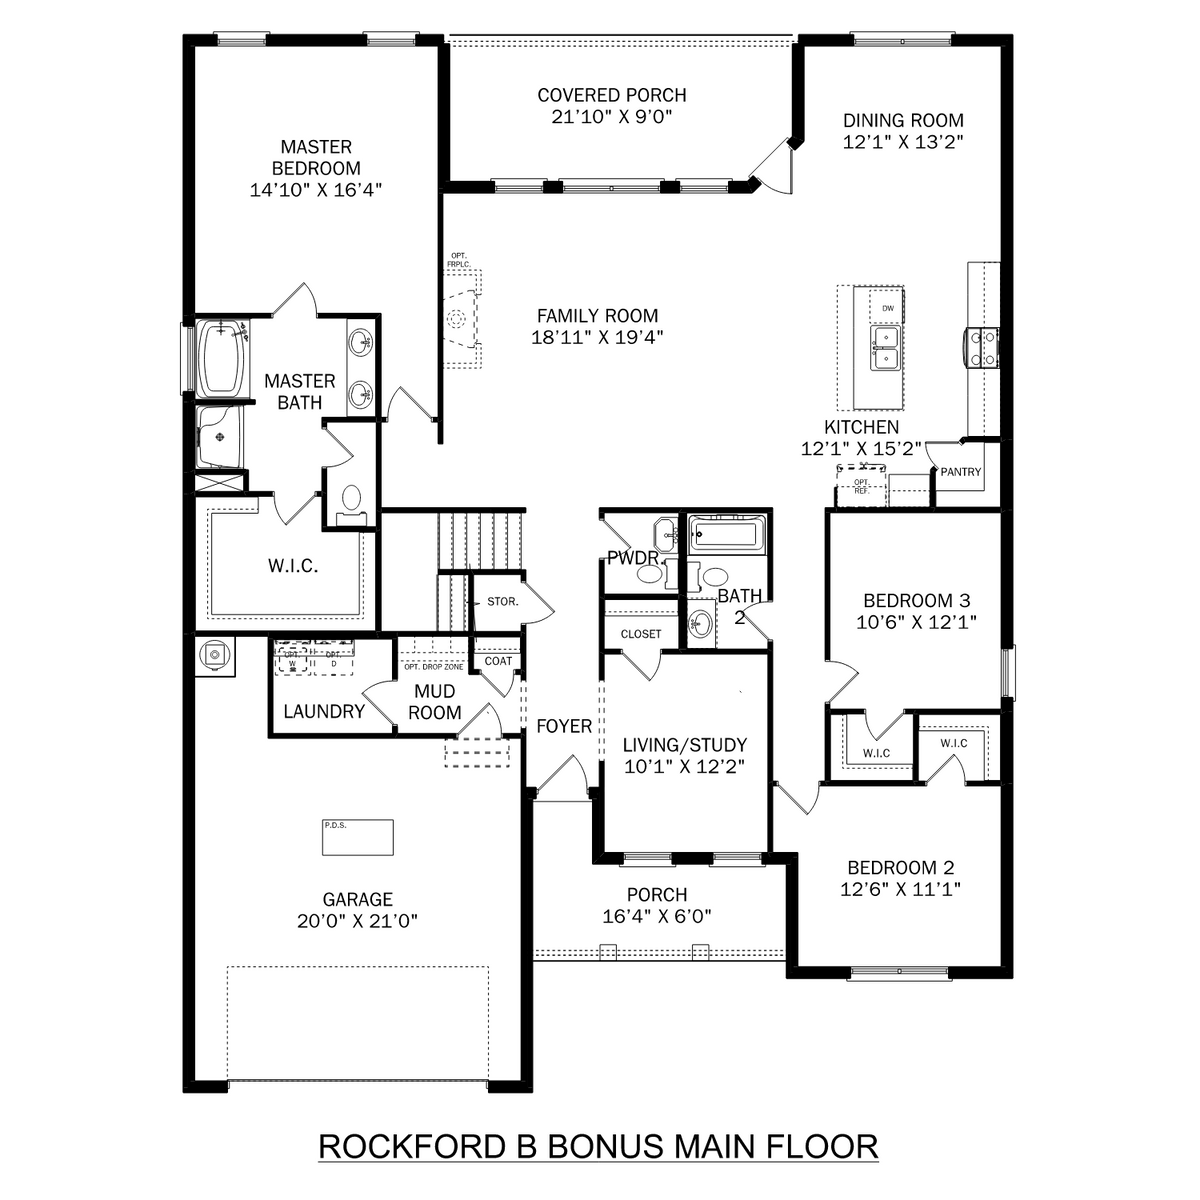 1 - The Rockford B with Bonus buildable floor plan layout in Davidson Homes' Kendall Downs community.